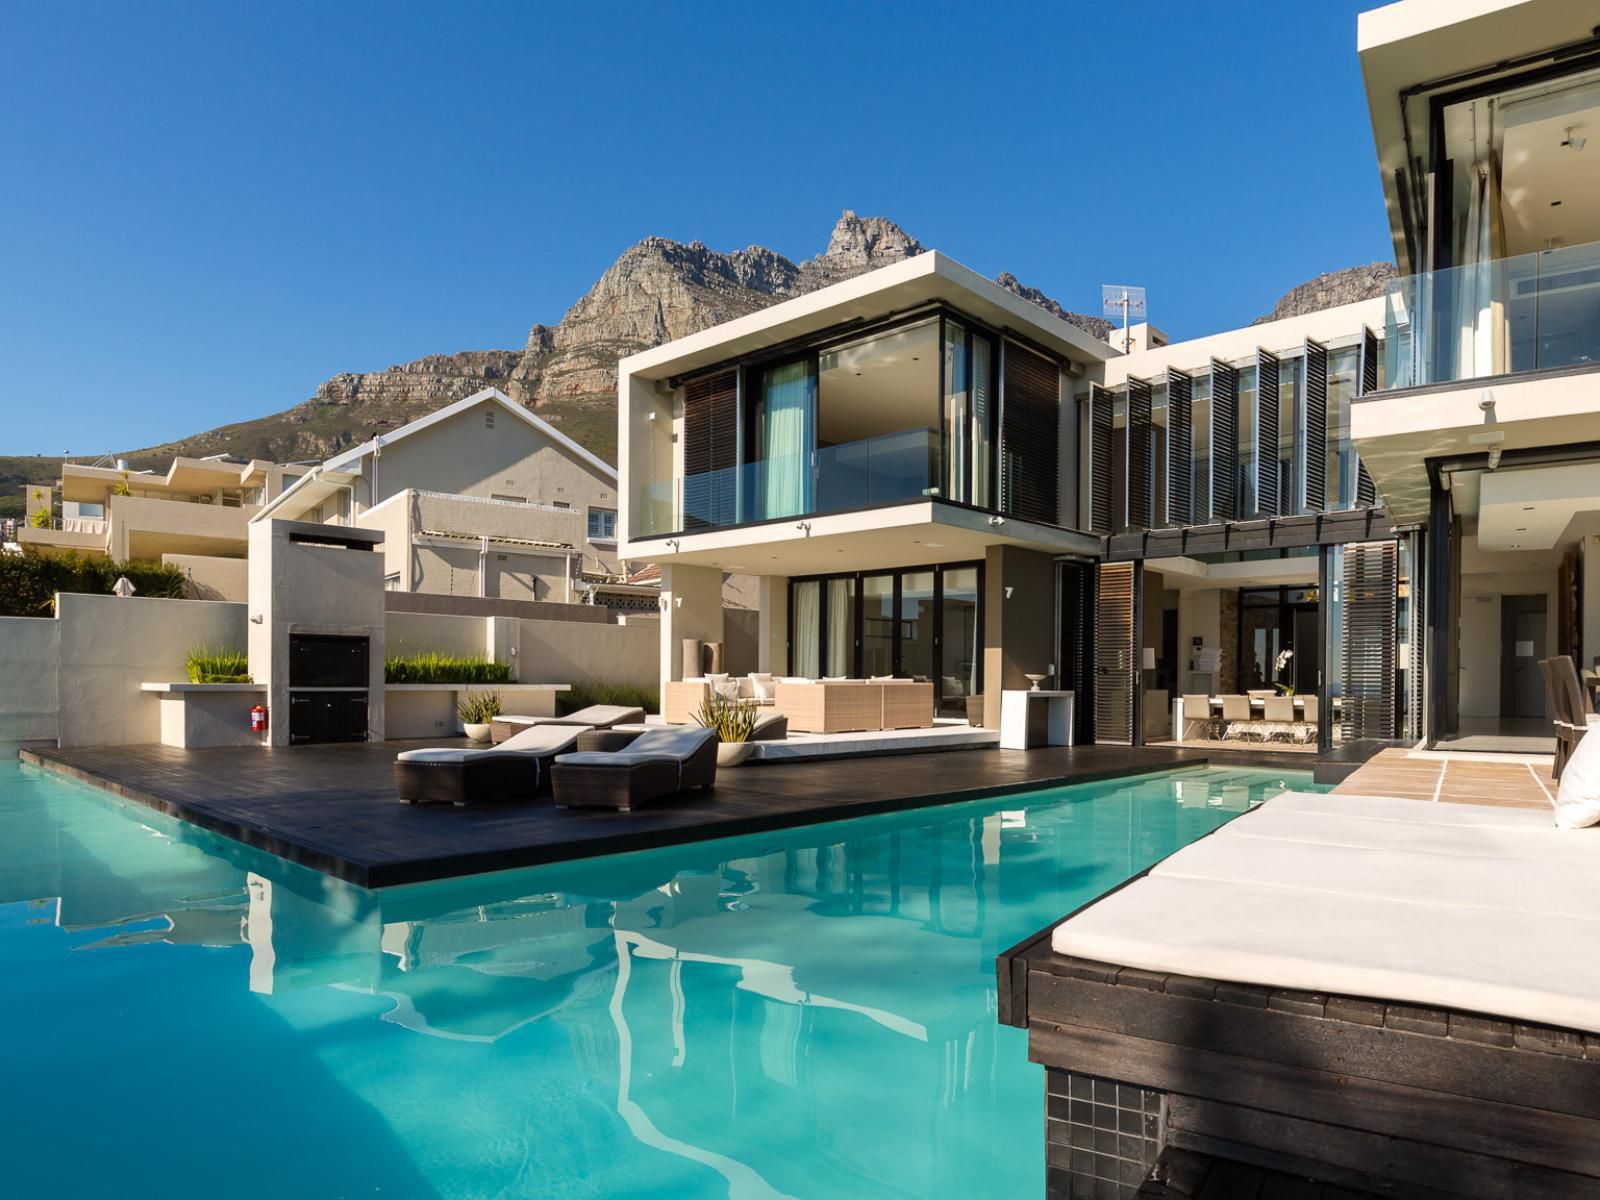 Serenity Villa Camps Bay Cape Town Western Cape South Africa House, Building, Architecture, Swimming Pool